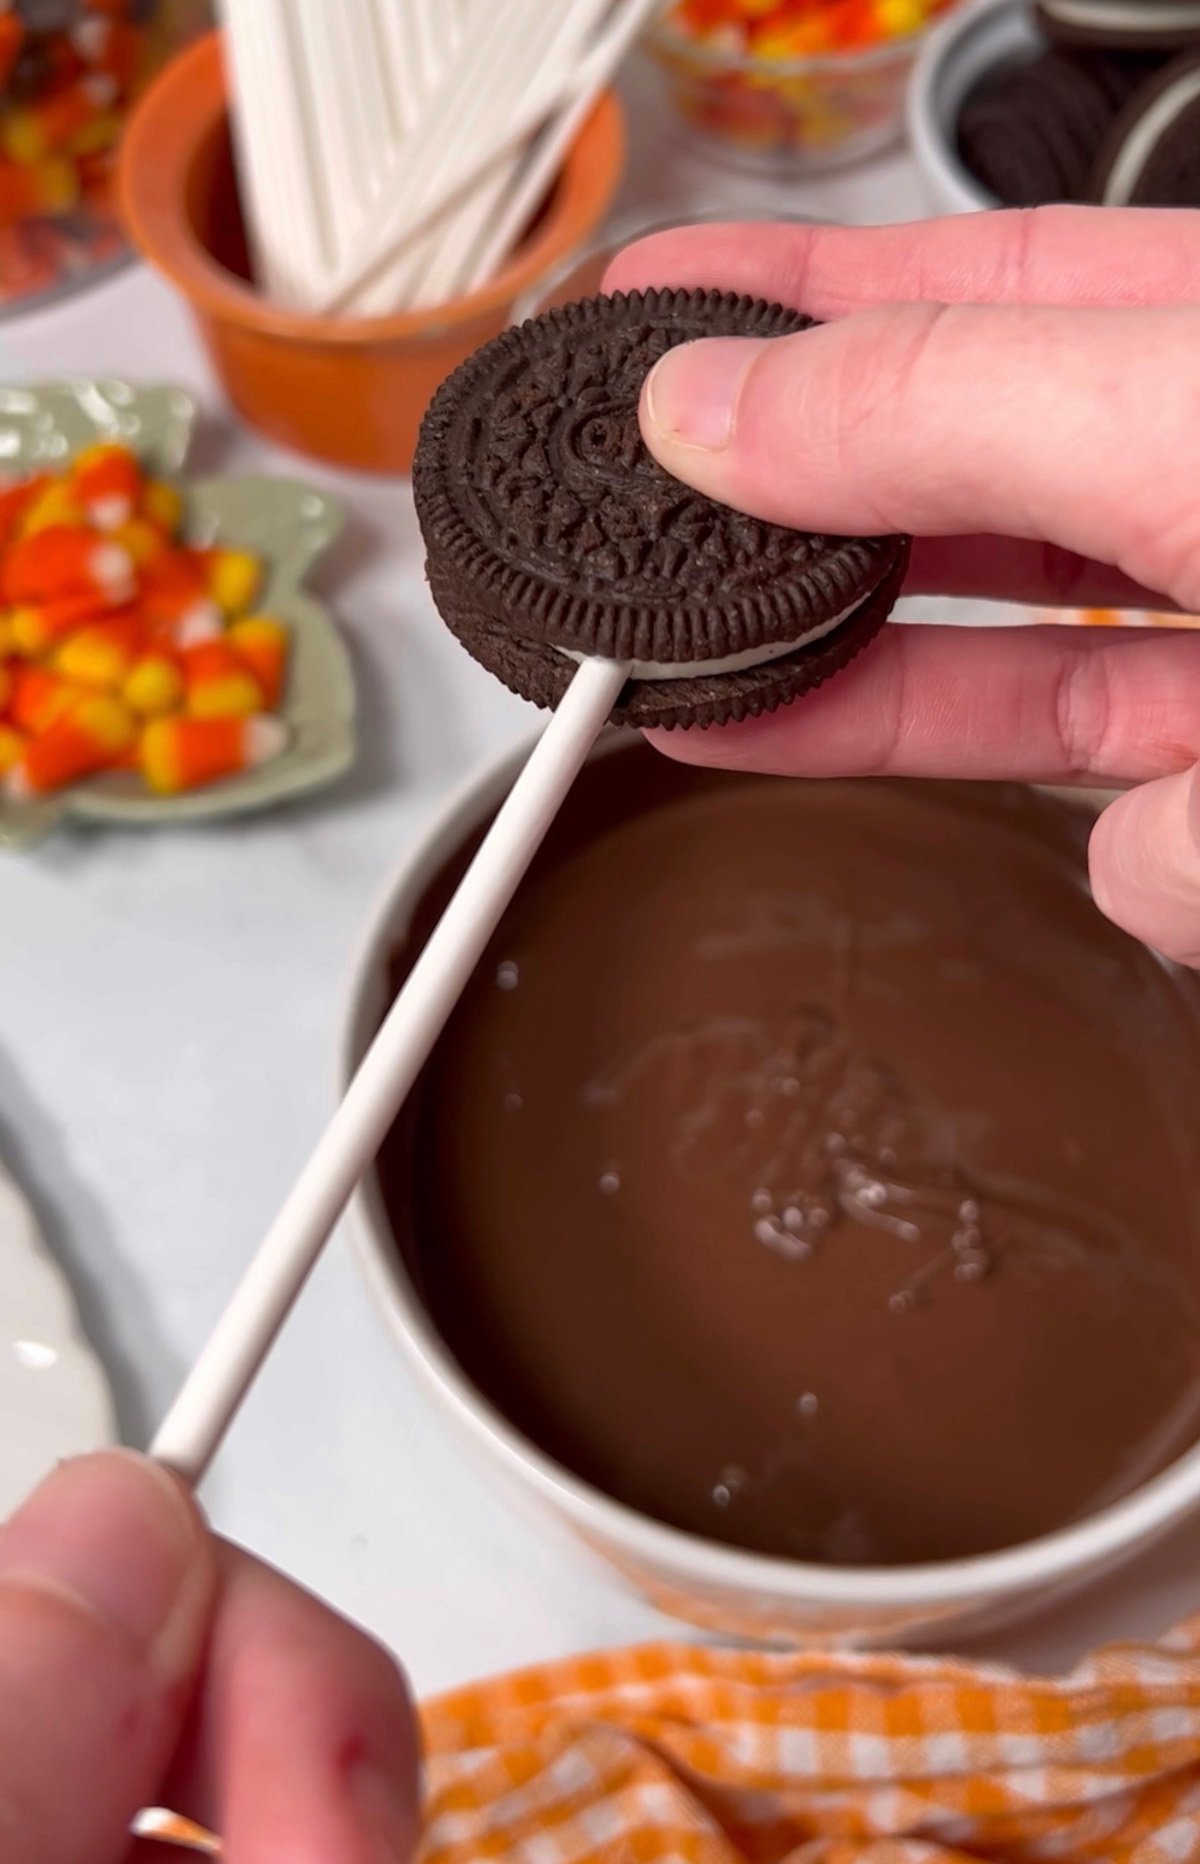 How to put oreo on popsicle stick.